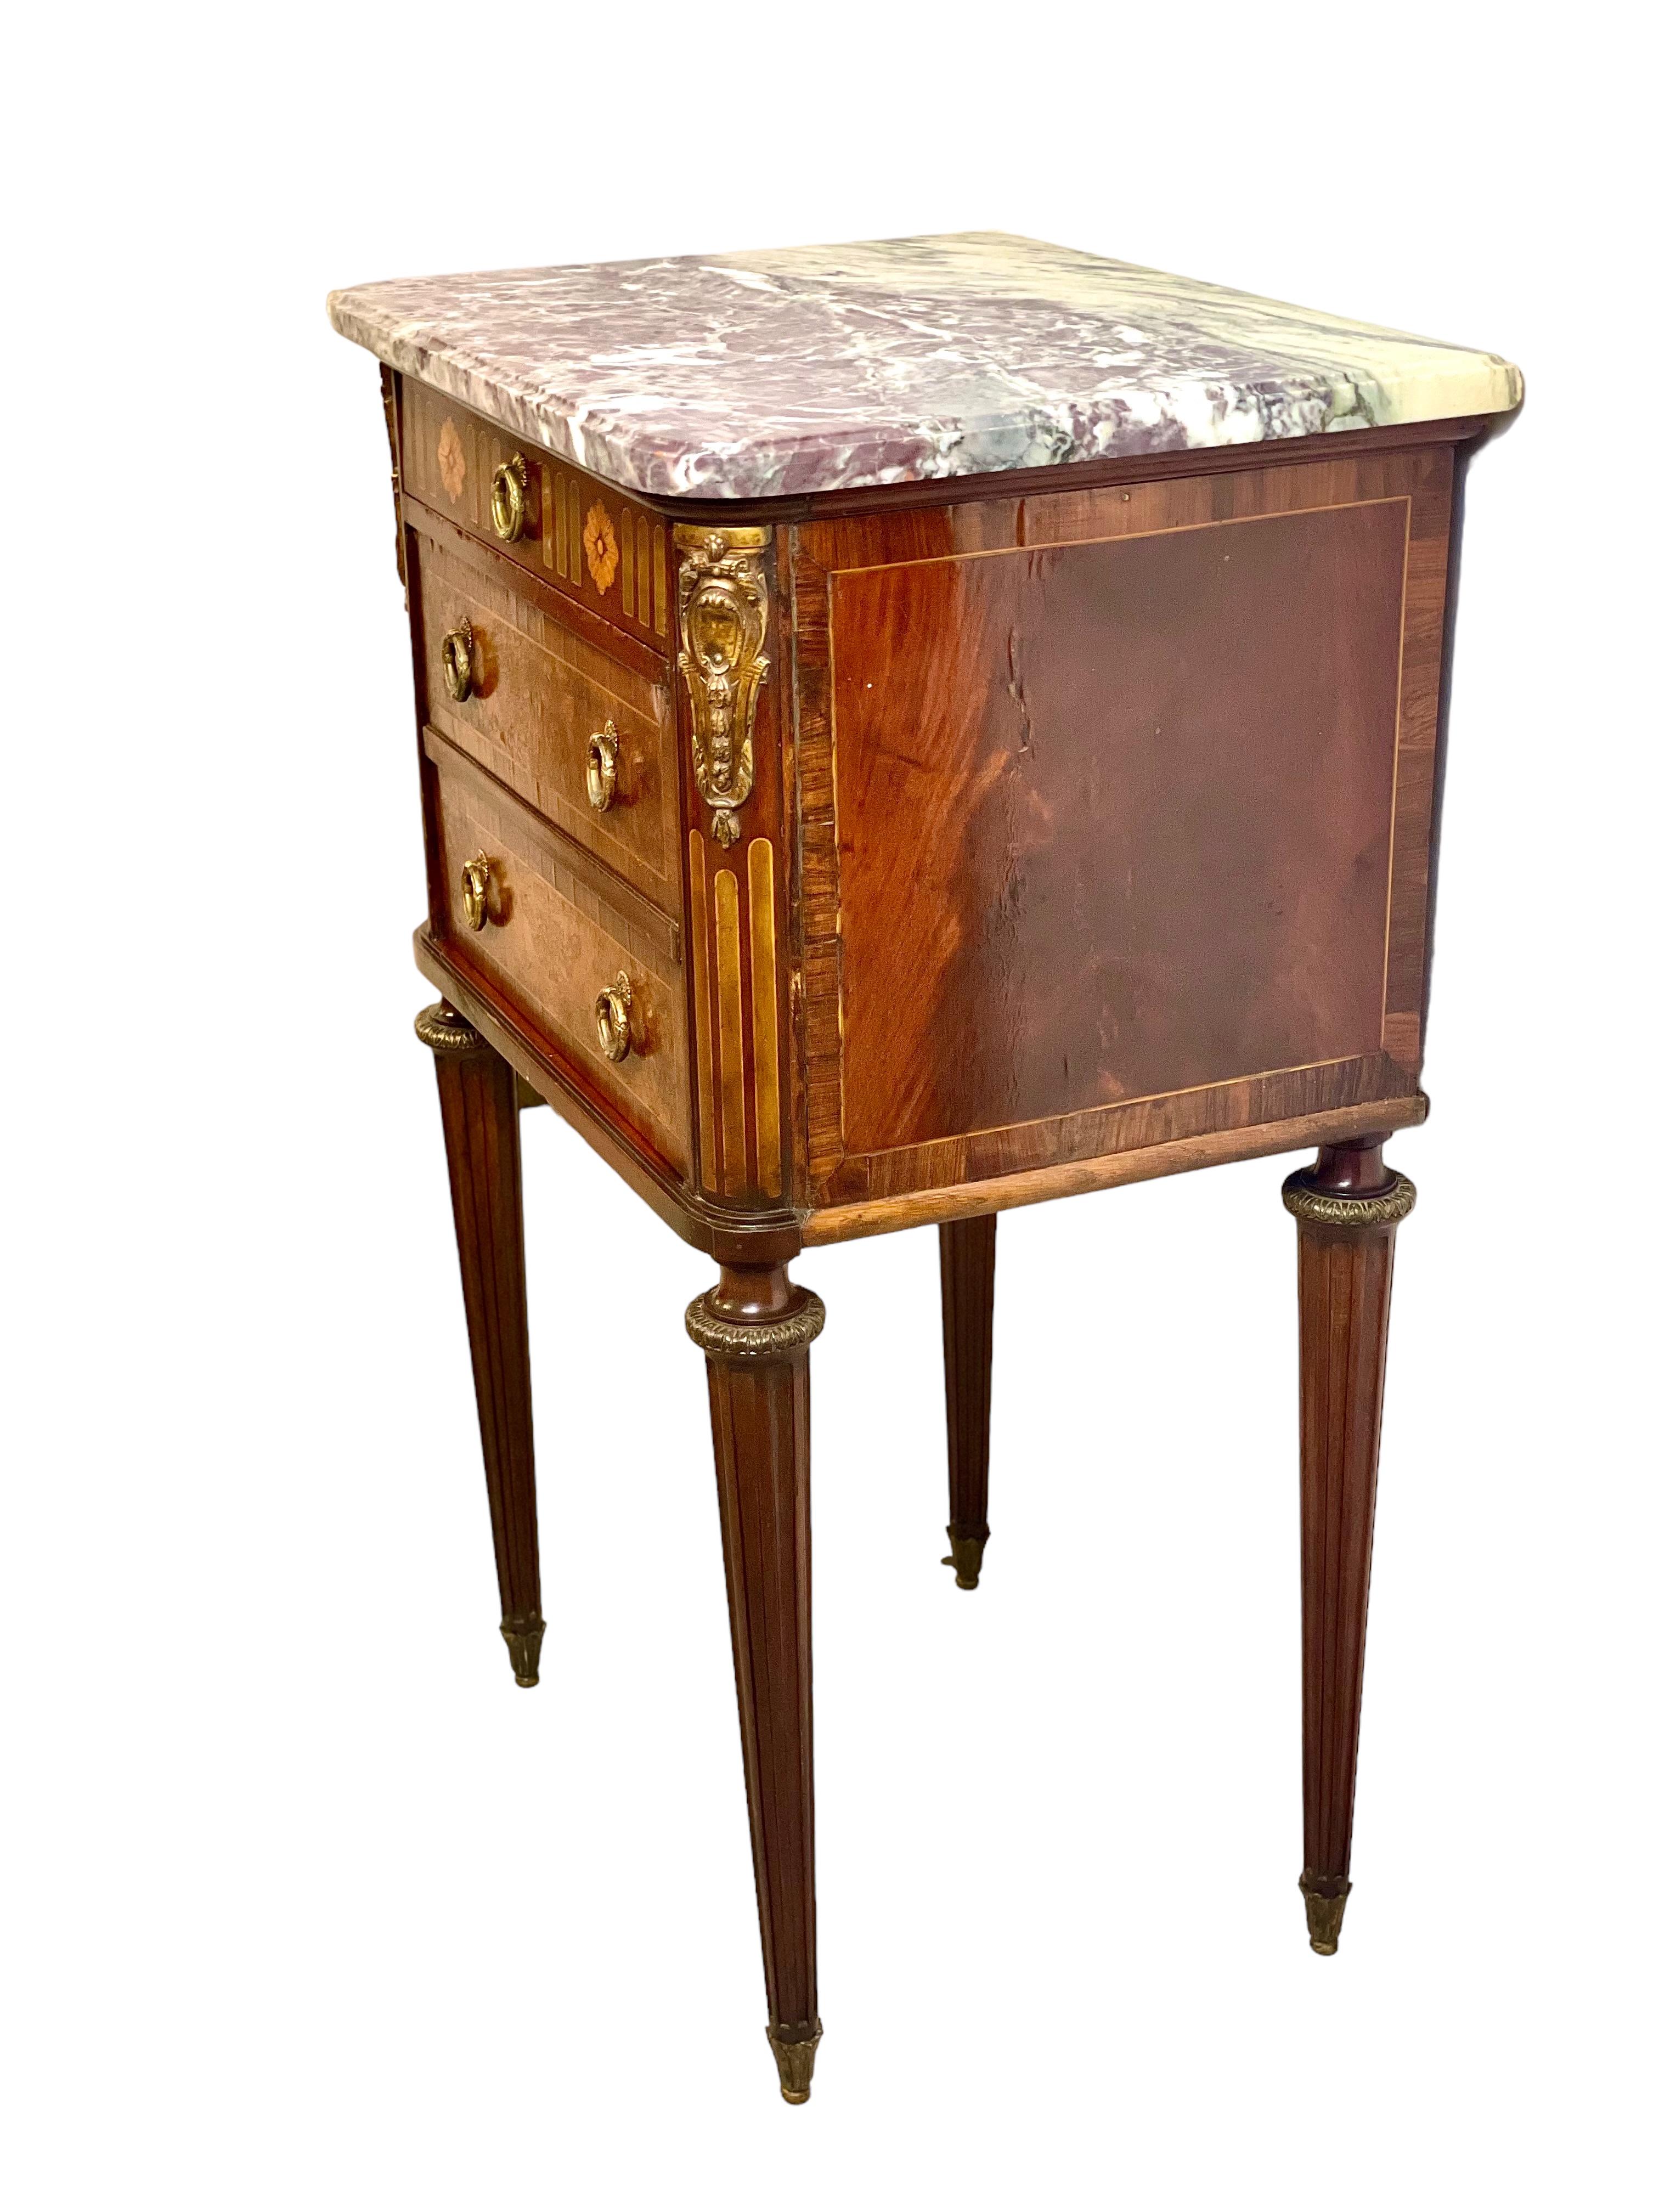 A fine Louis XVI style bedside table by renowned Parisian cabinet maker Soubrier, in burr wood veneer with an inlaid decoration of flowers and simulated grooves. This impressive cabinet is topped with a stunning grey and white marbled granite top